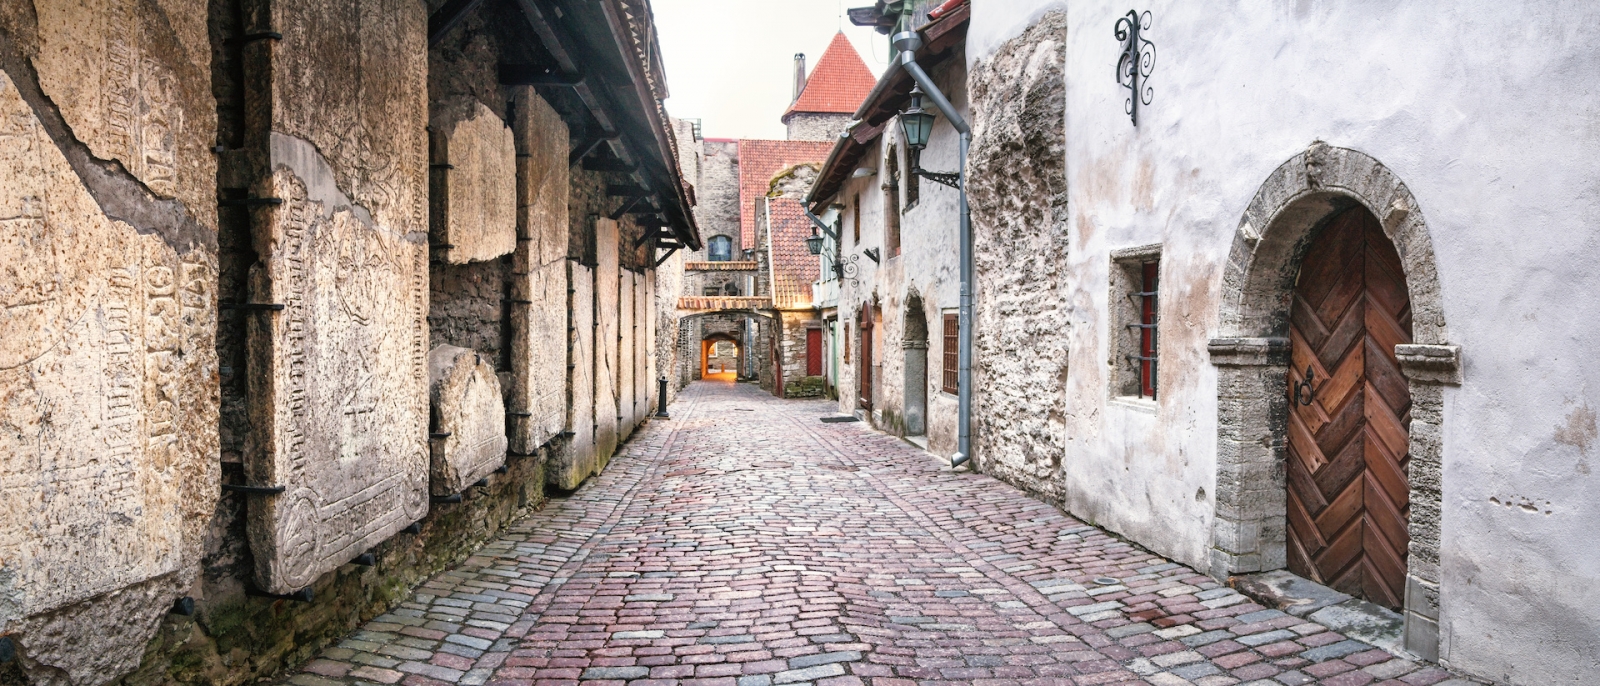 Panoramic View of St. Catherine's Passage, Old Town of Tallinn, Estonia